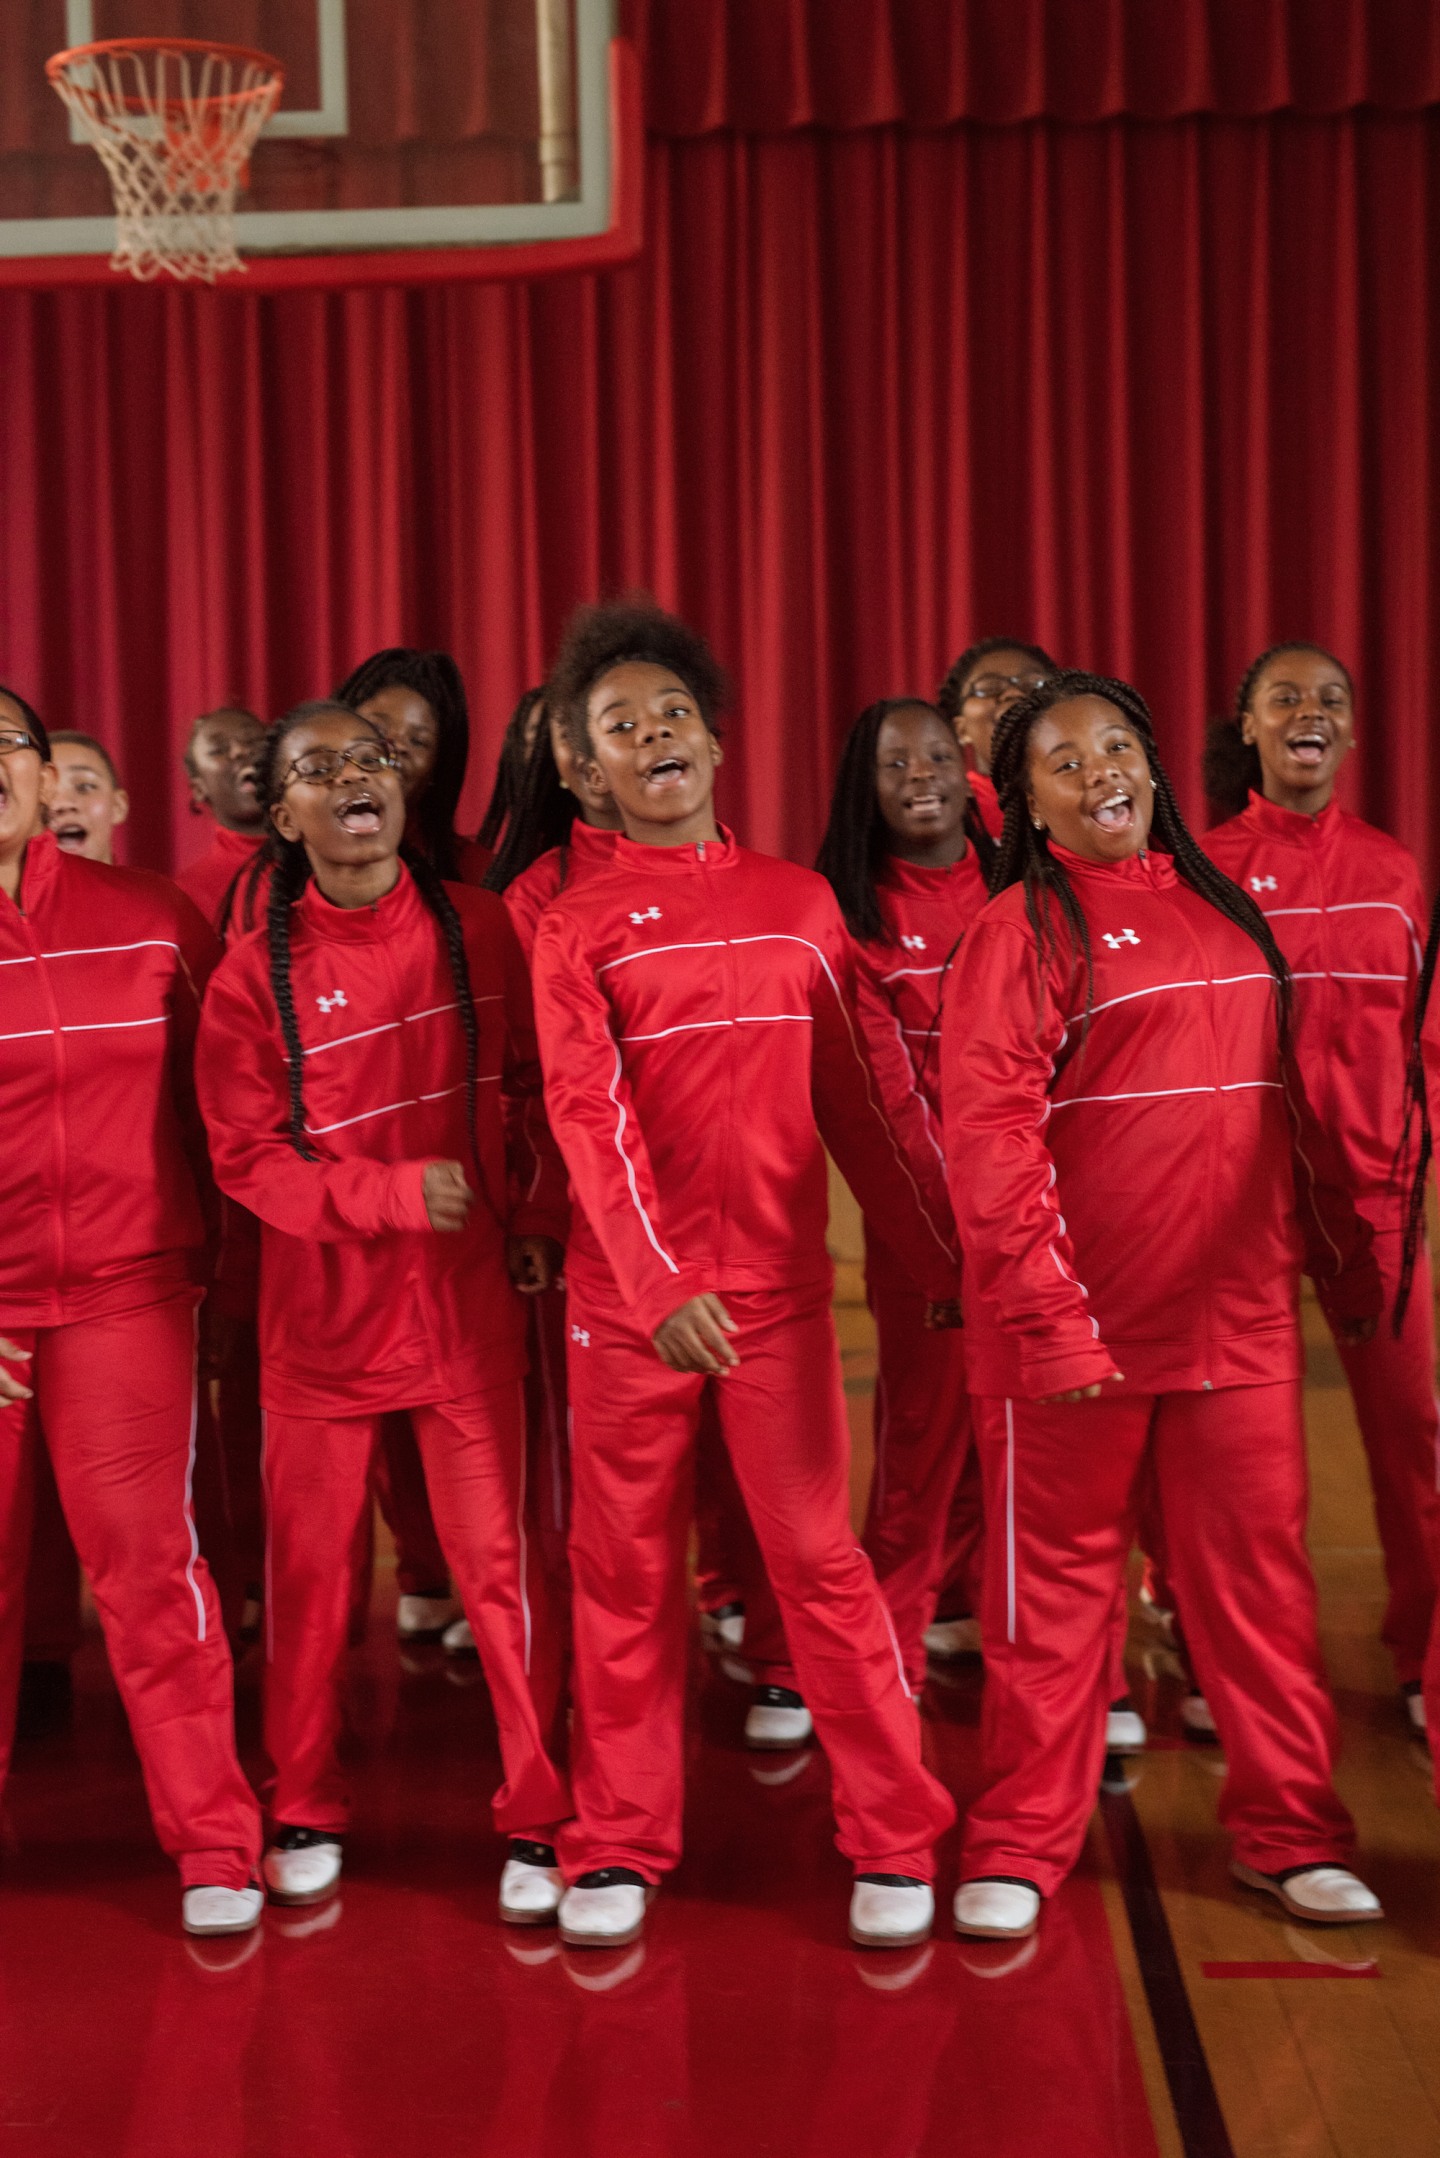 This video of a Baltimore children’s choir singing “Santa Claus Is Coming To Town” is gonna melt your soul